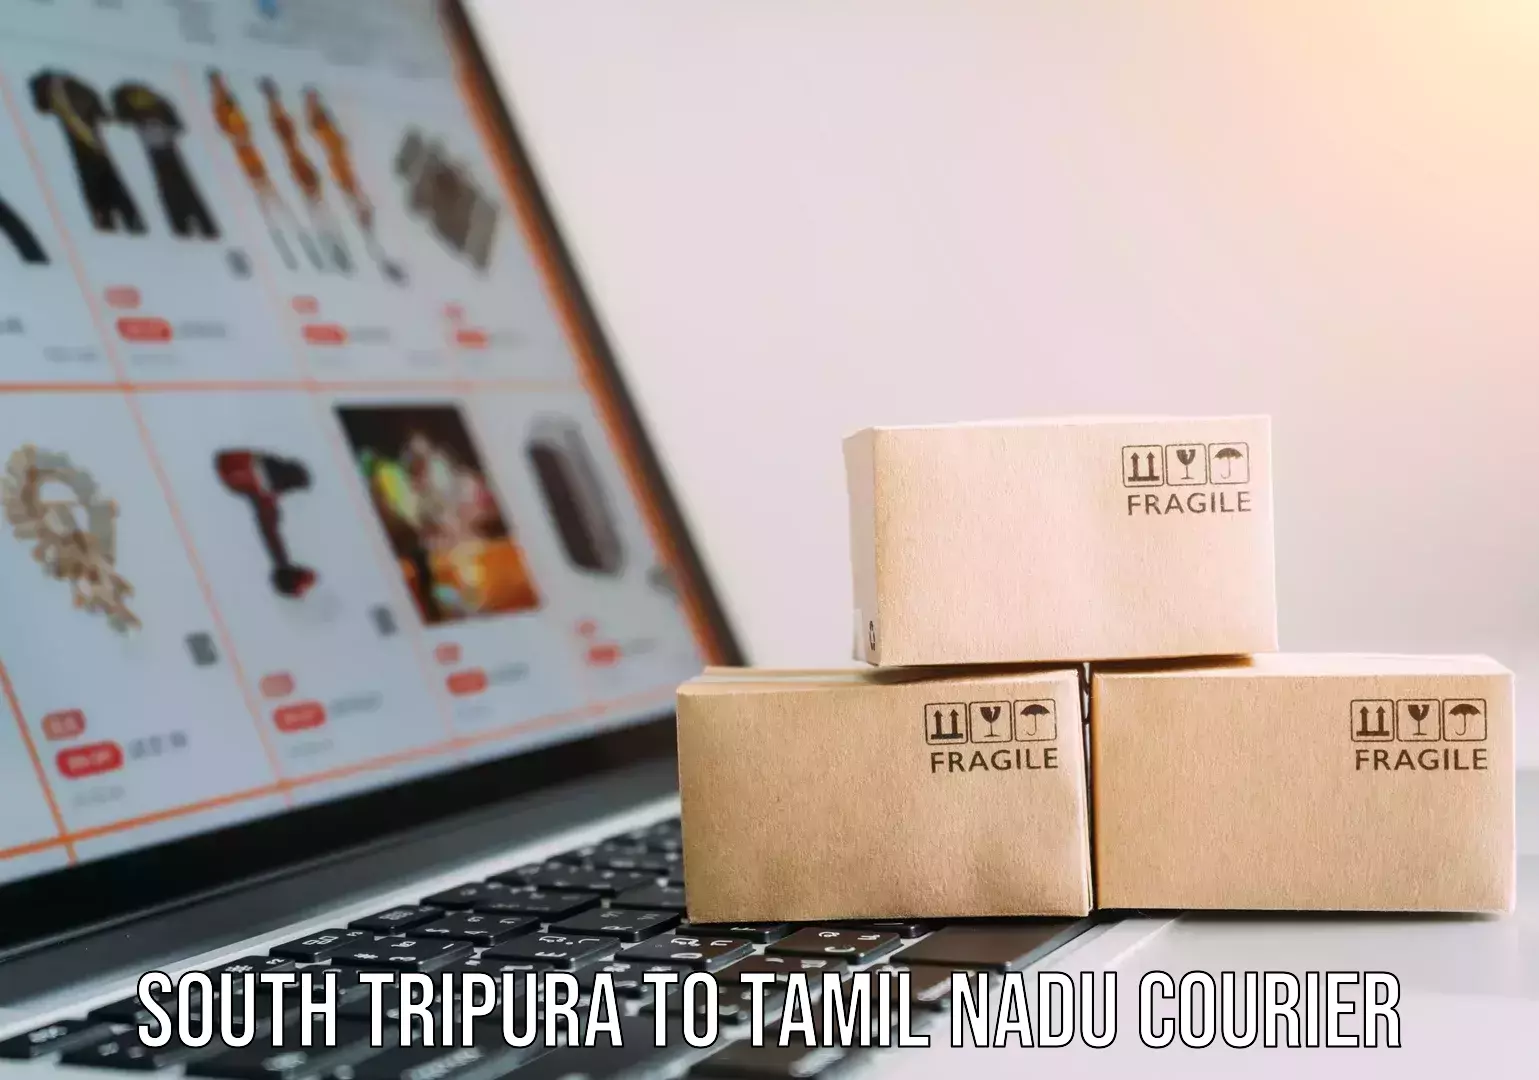 Postal and courier services South Tripura to Tamil Nadu